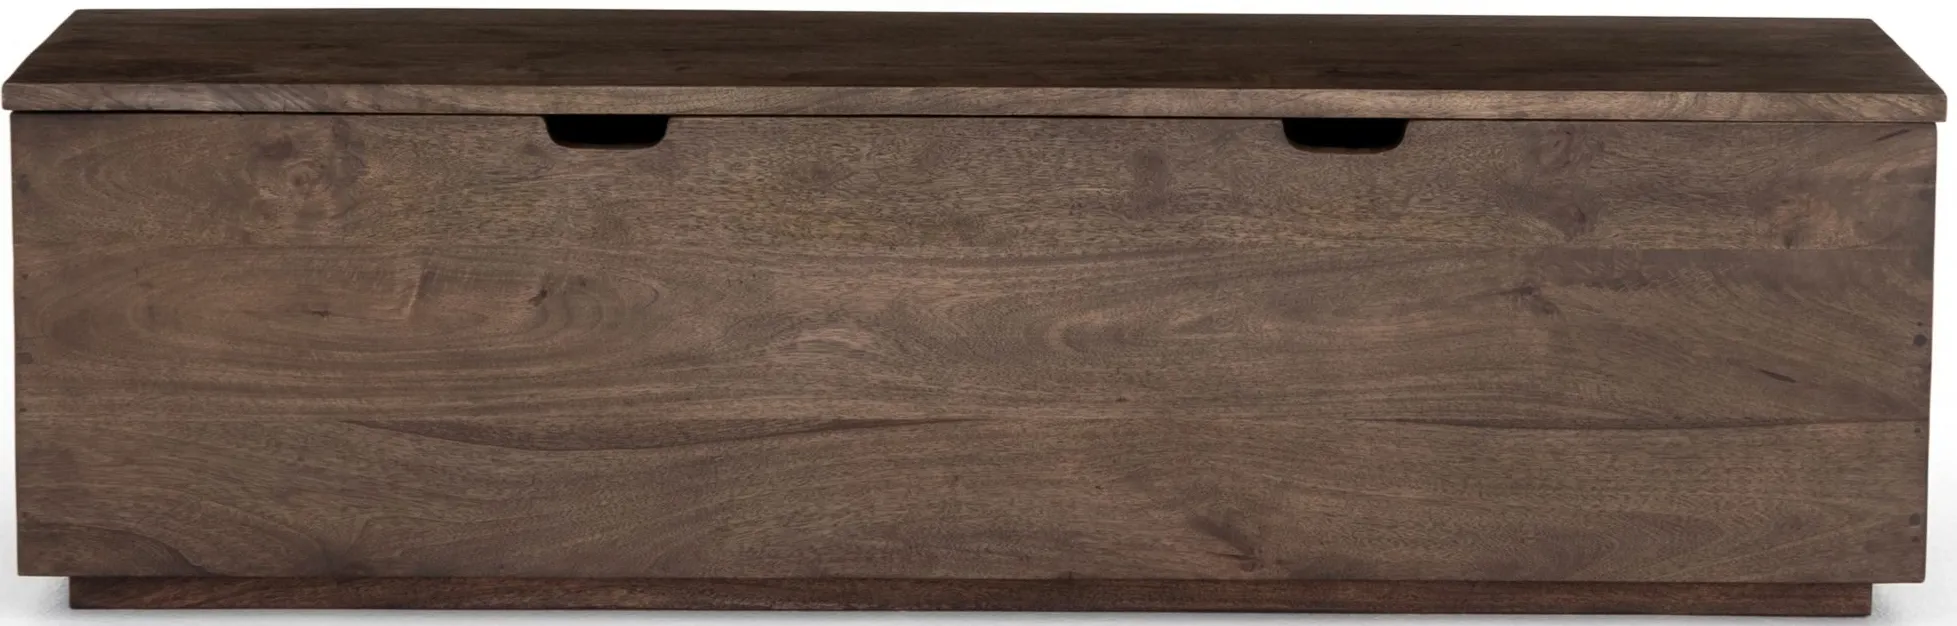 Harmon Bedroom Trunk in Aged Brown by Four Hands